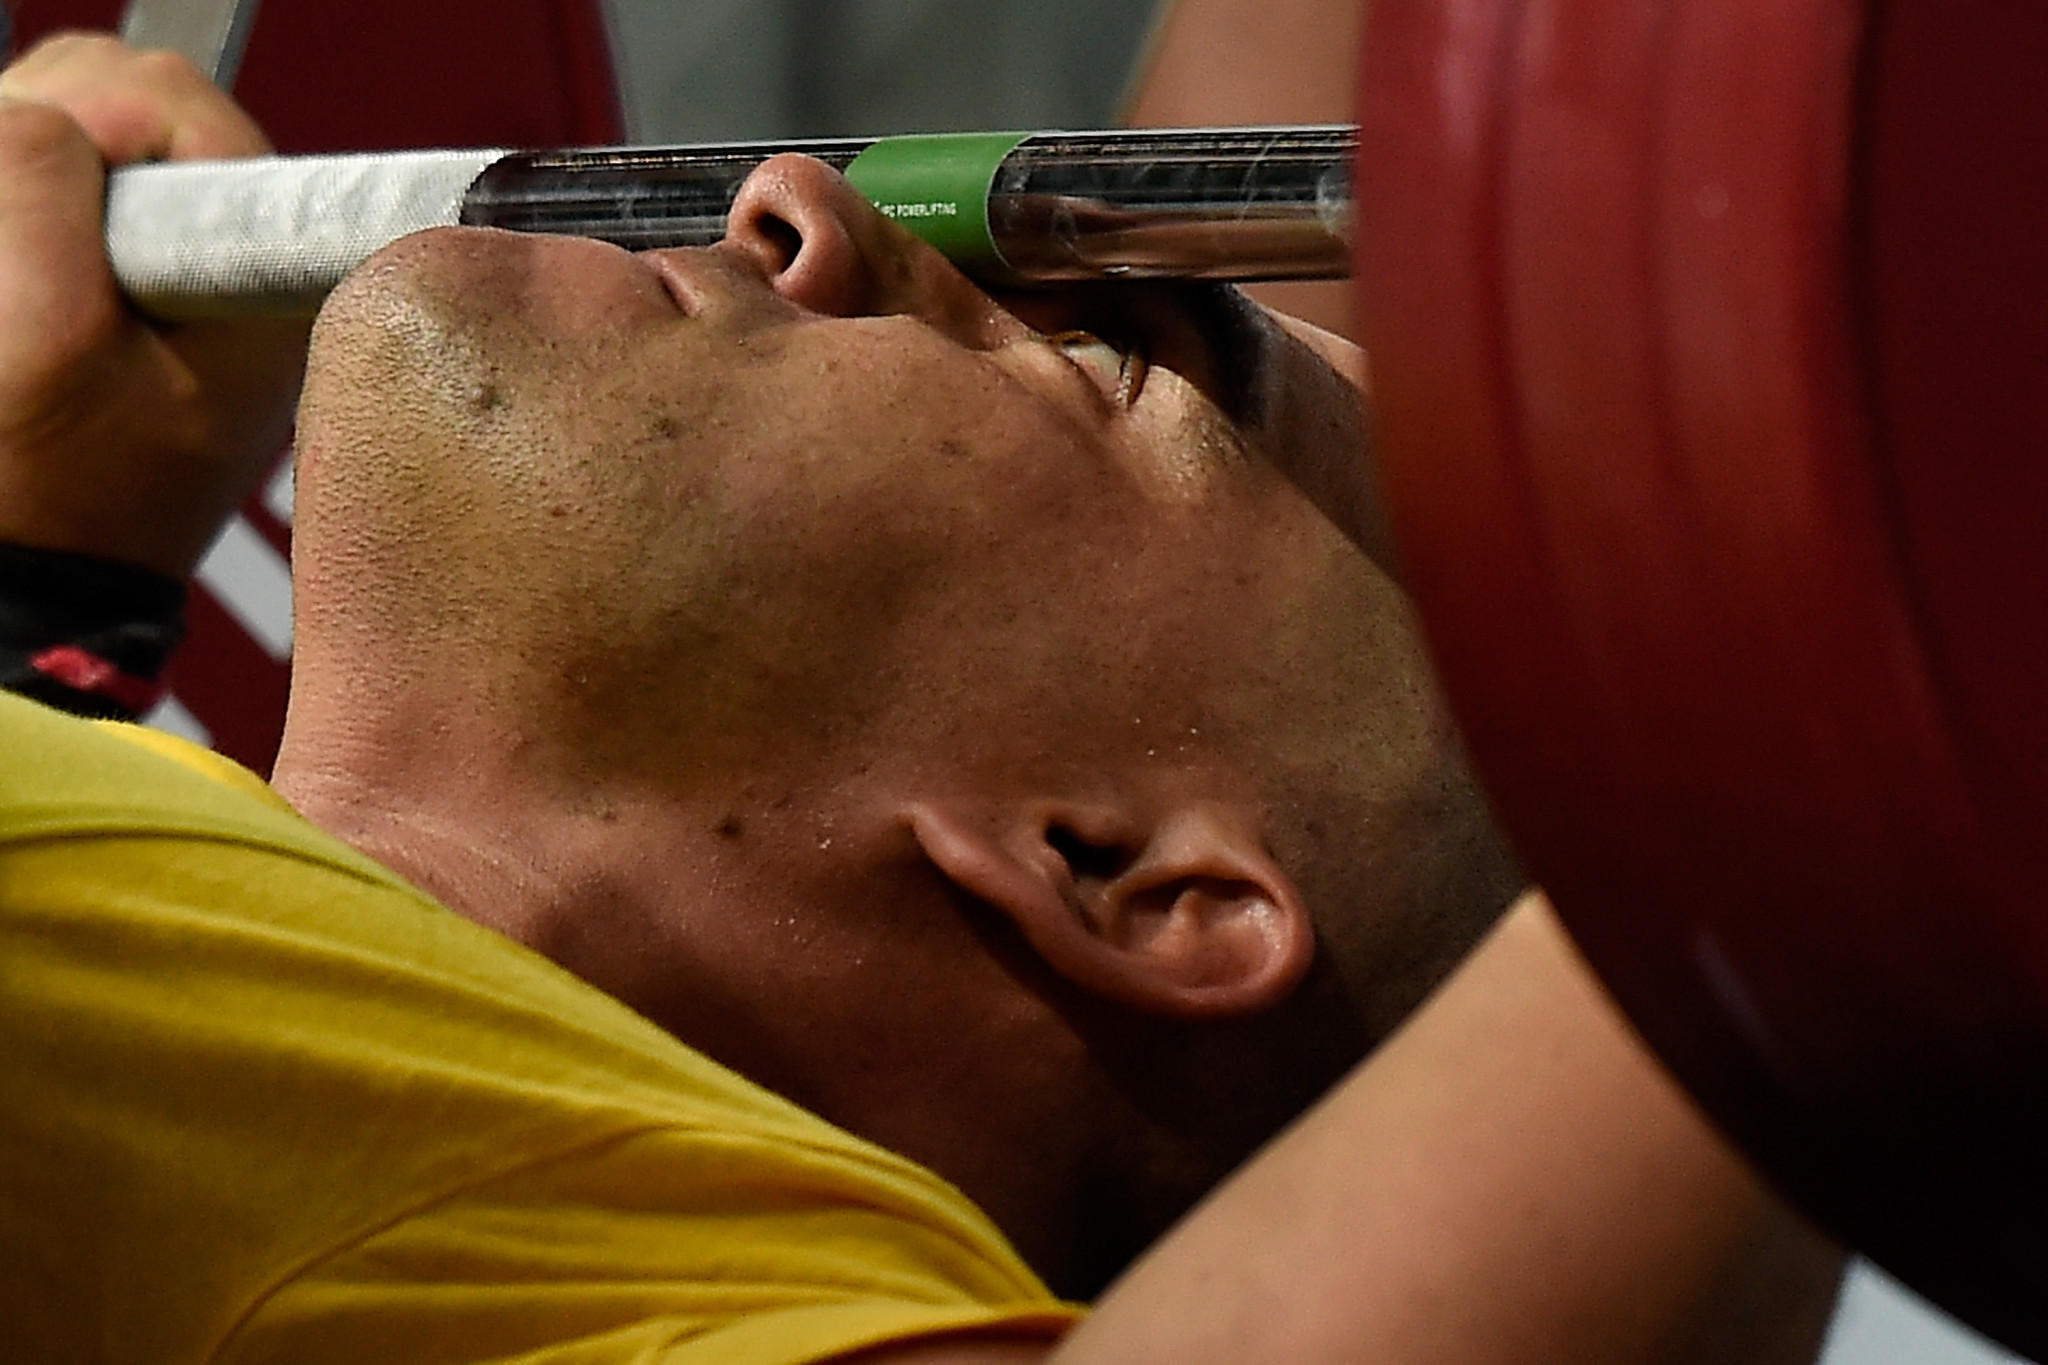 Colombian powerlifter wins IPC Allianz Athlete of the Month Award for December 